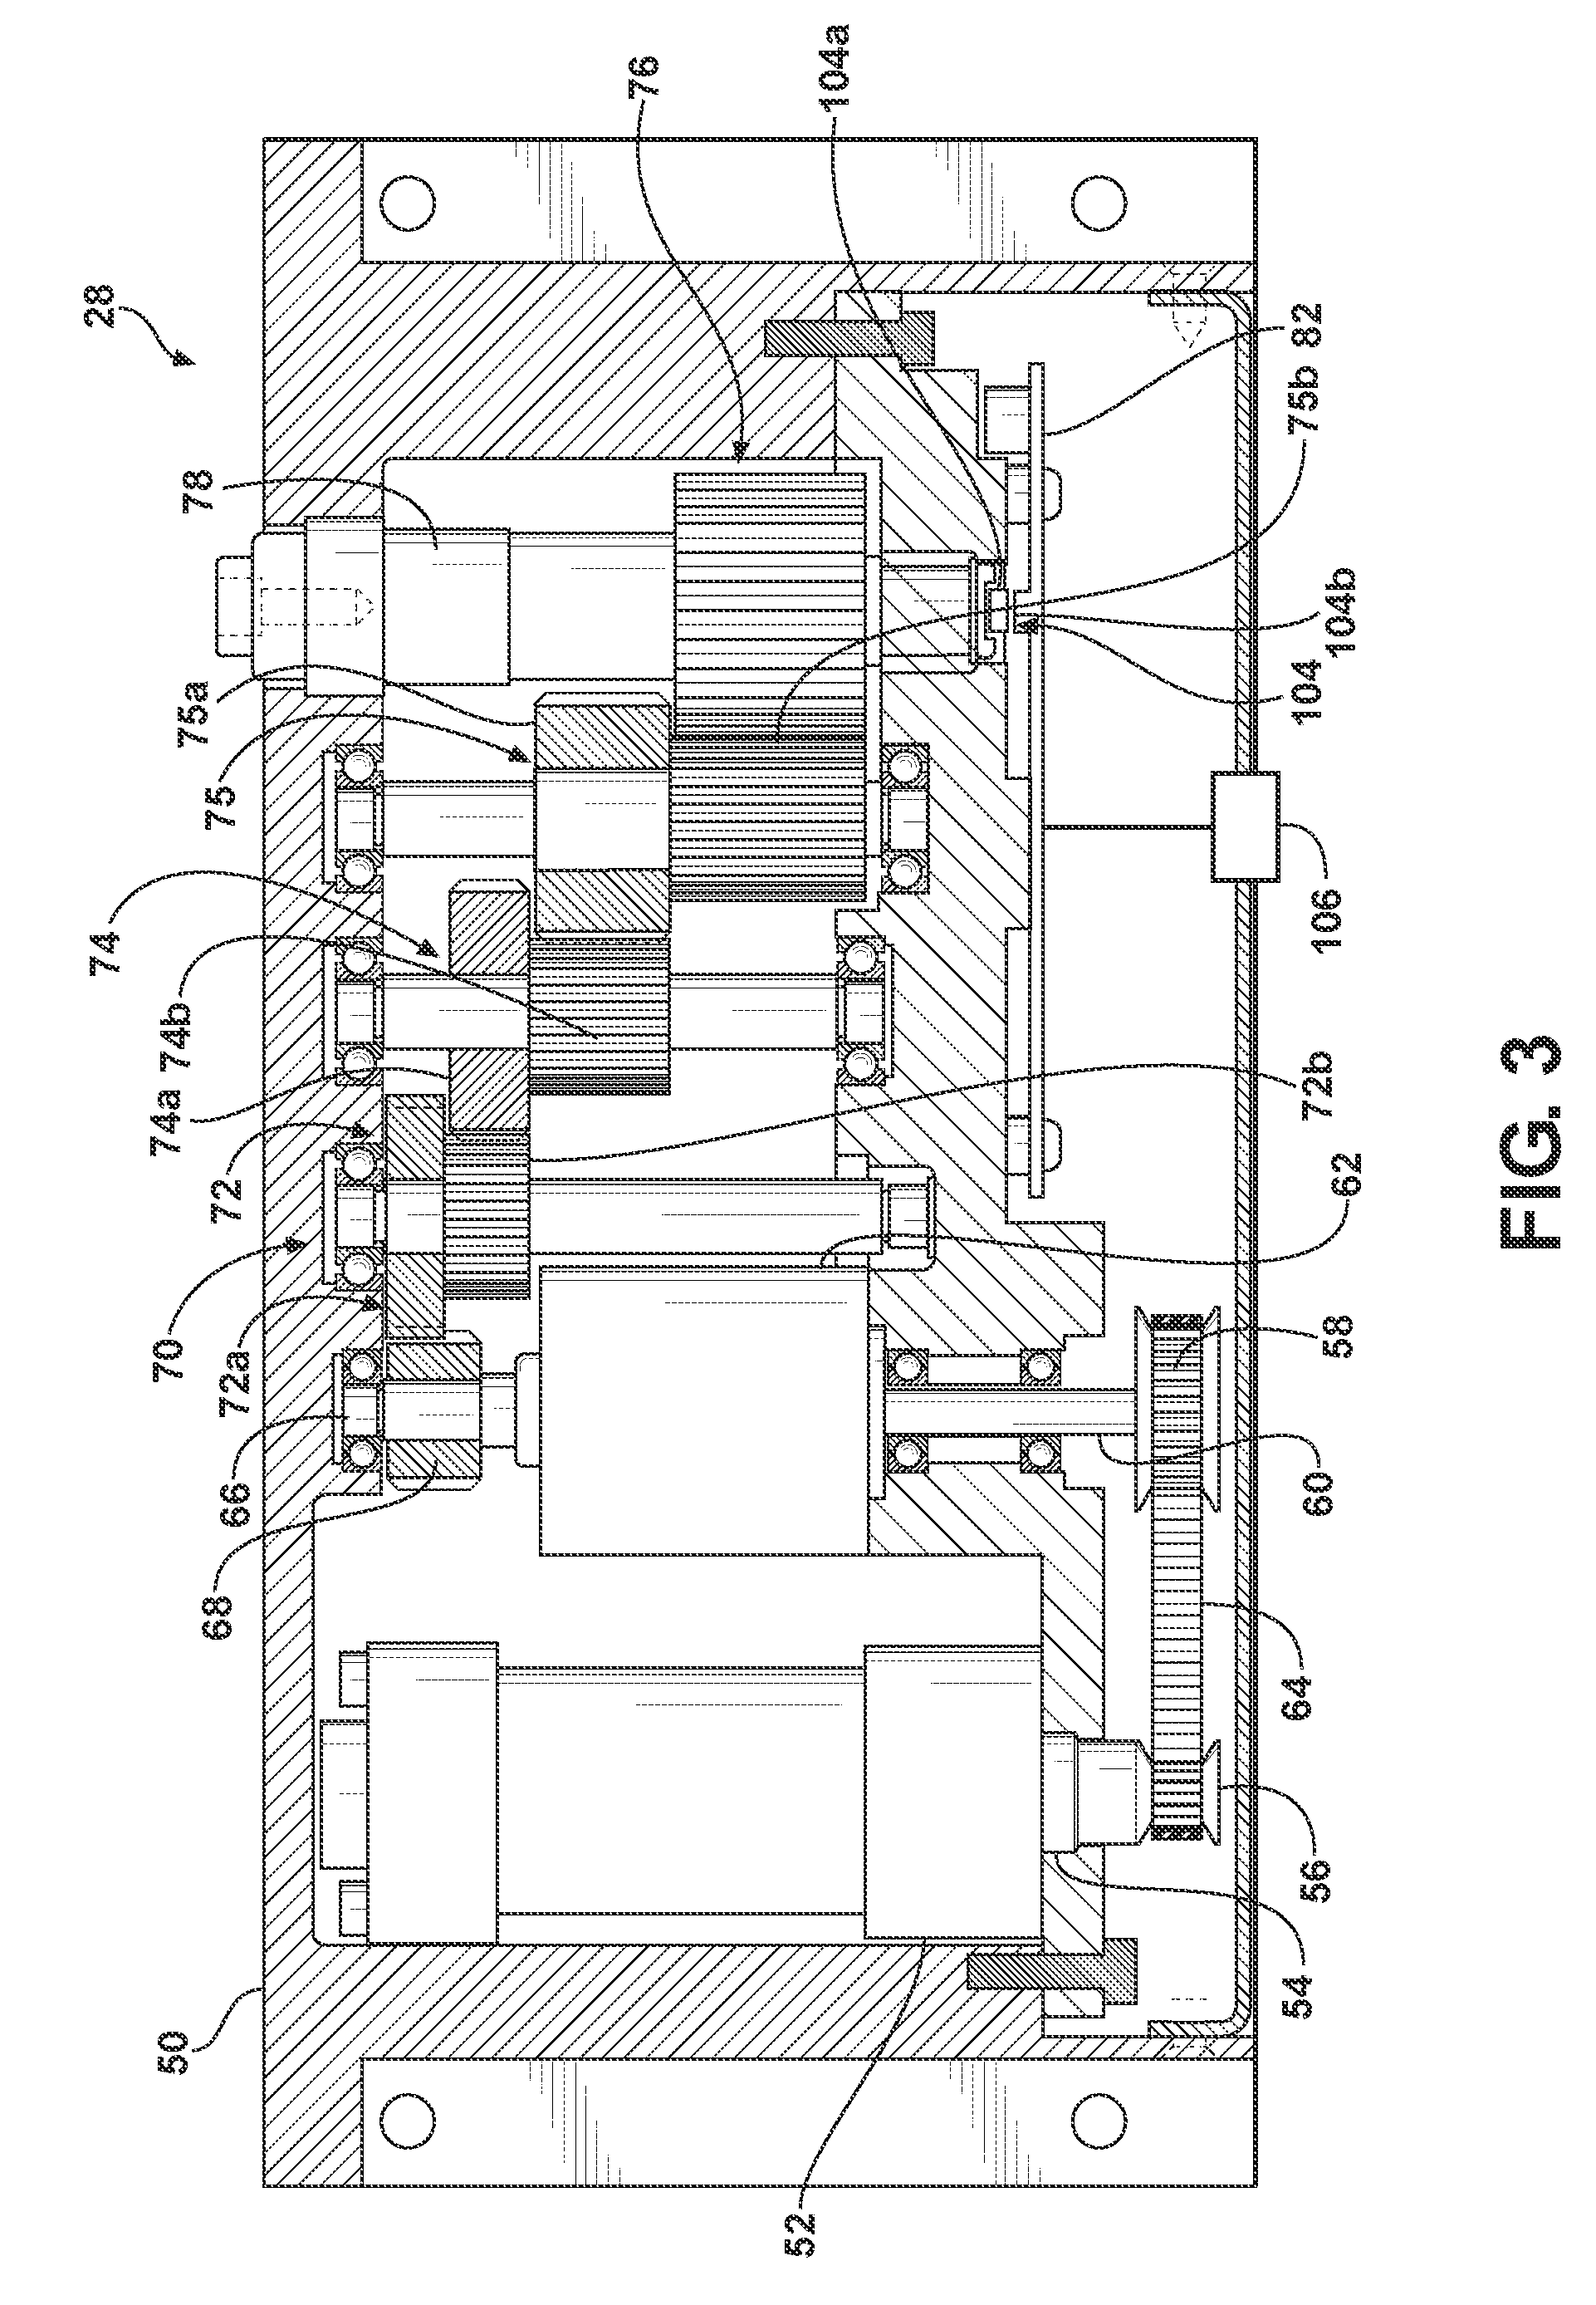 Method of controlling an automatic door system